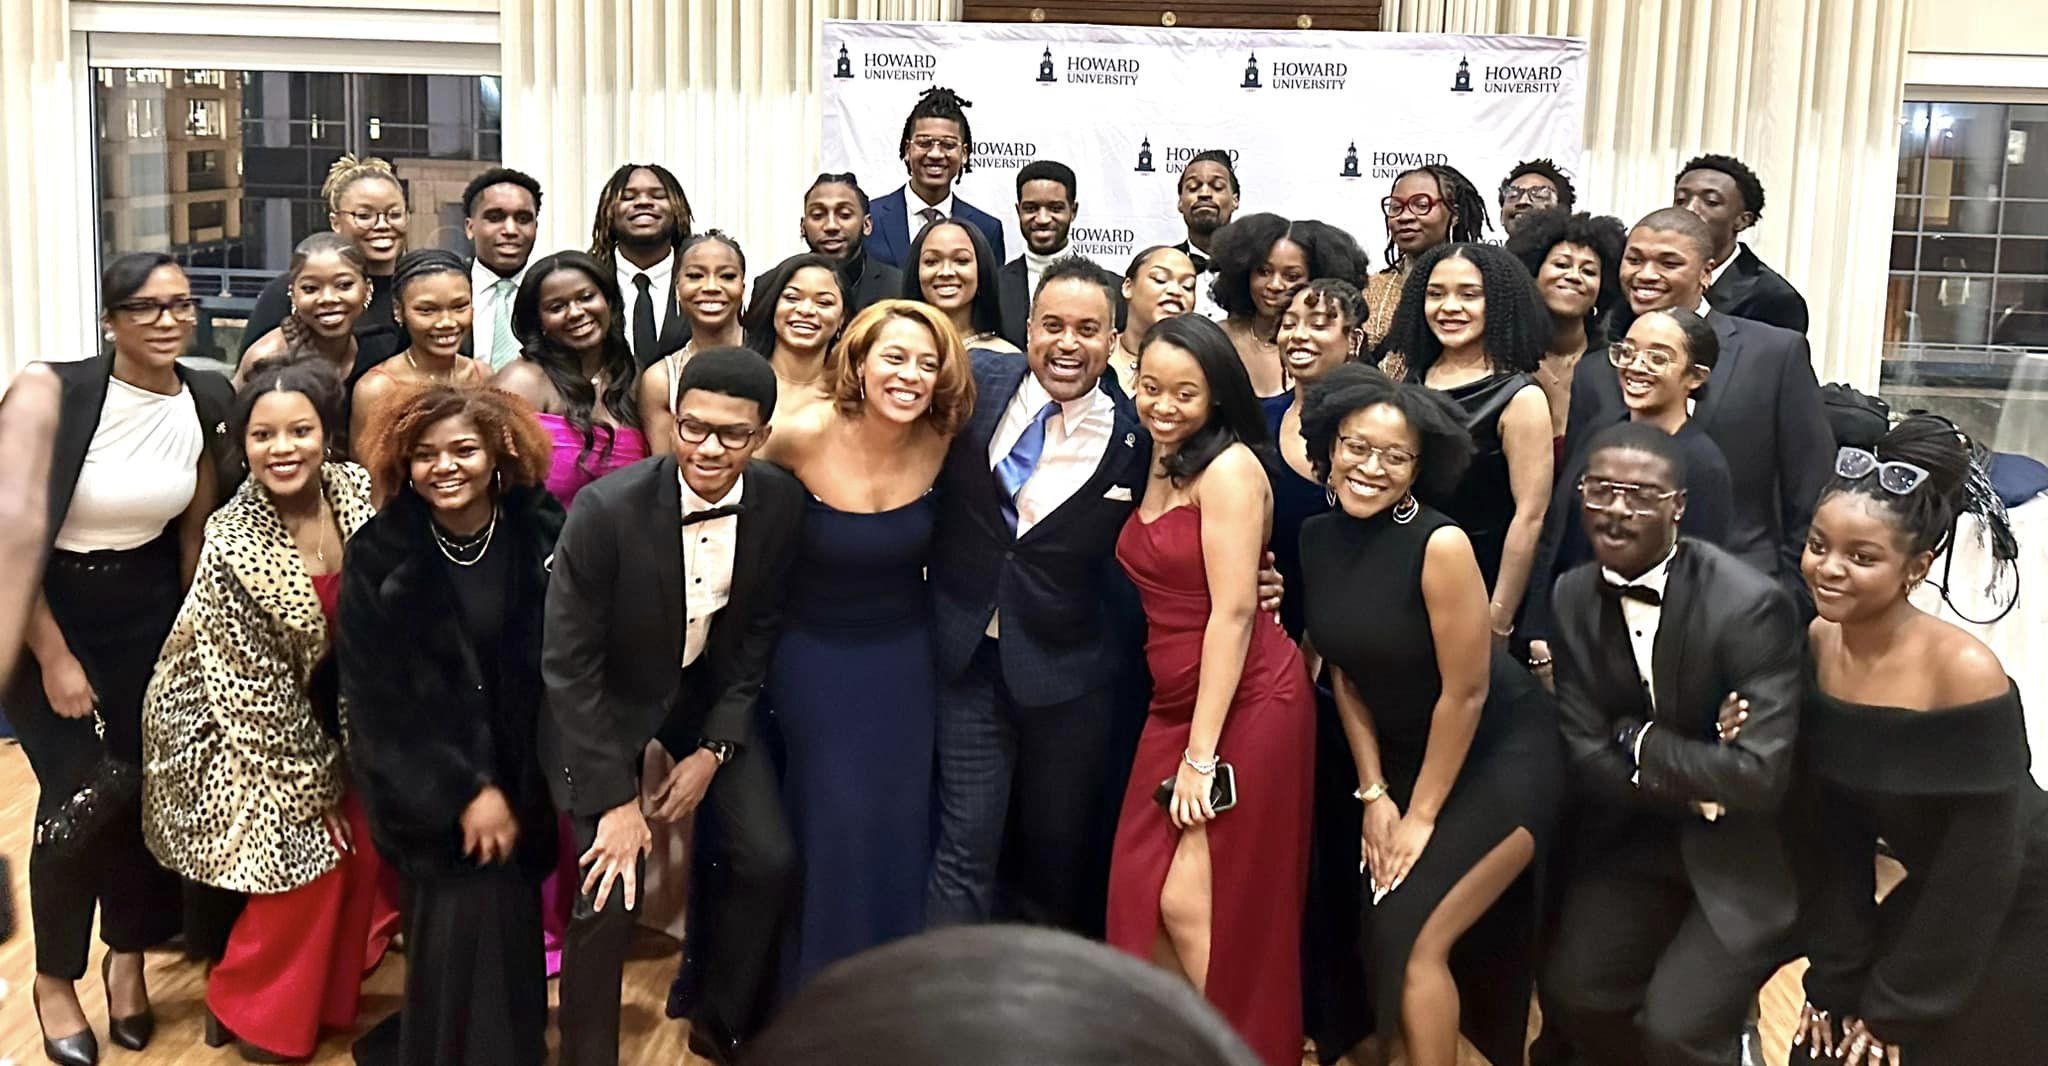 The Hilltop, Nation’s Oldest Black Collegiate Newspaper Celebrates 100 Years